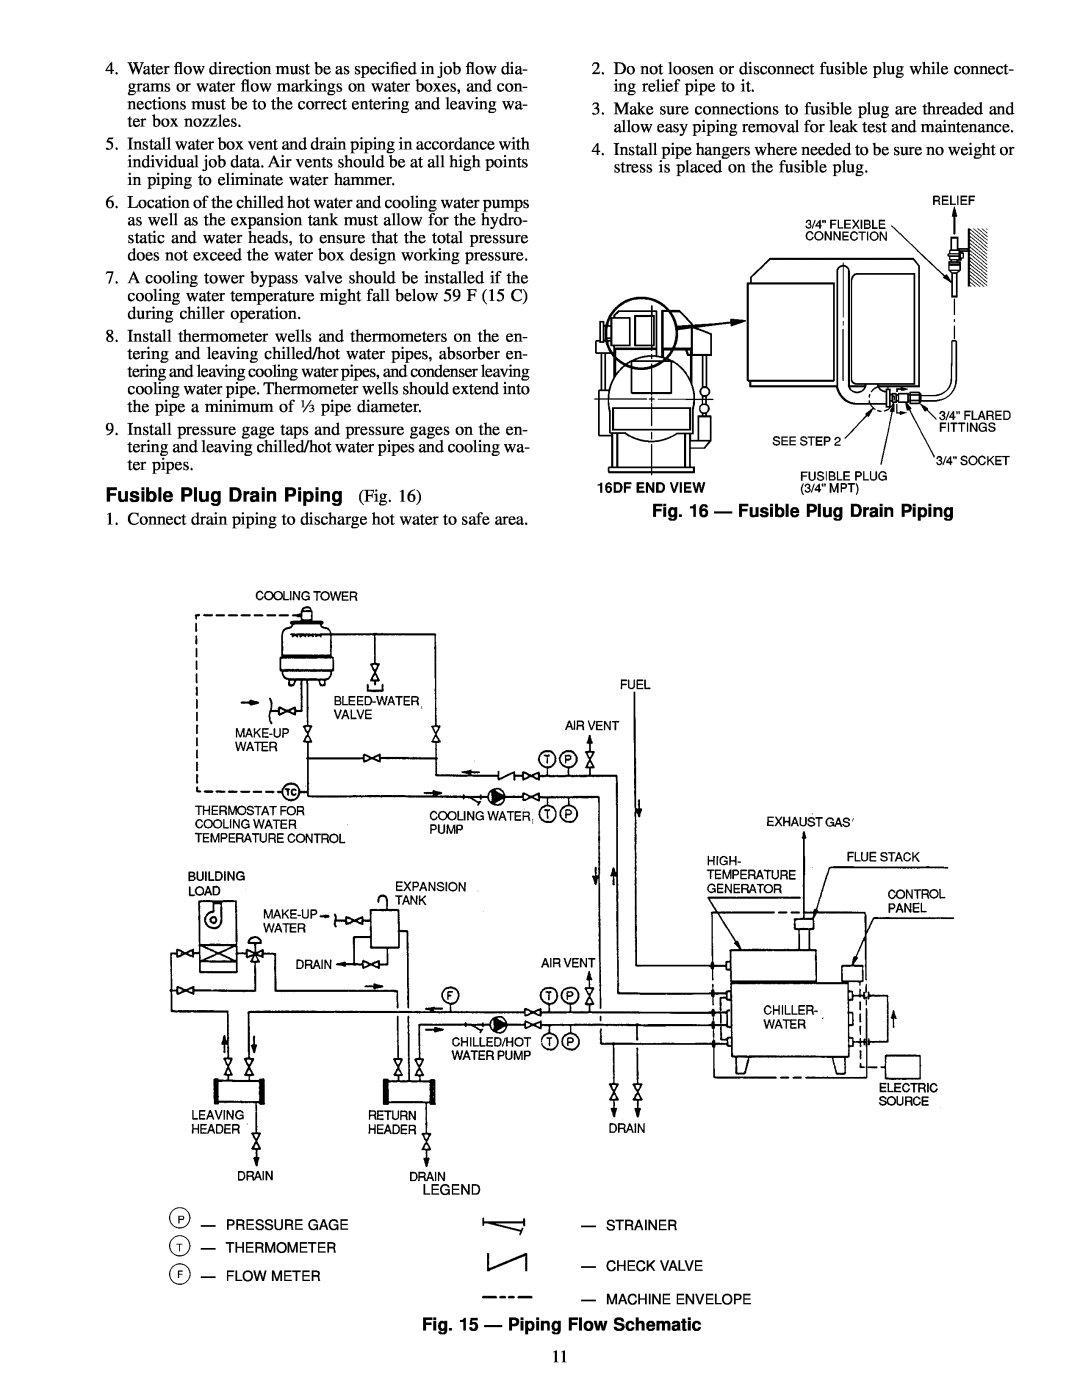 Carrier 16DF013-050 Fusible Plug Drain Piping Fig, Ð Fusible Plug Drain Piping, Ð Piping Flow Schematic 